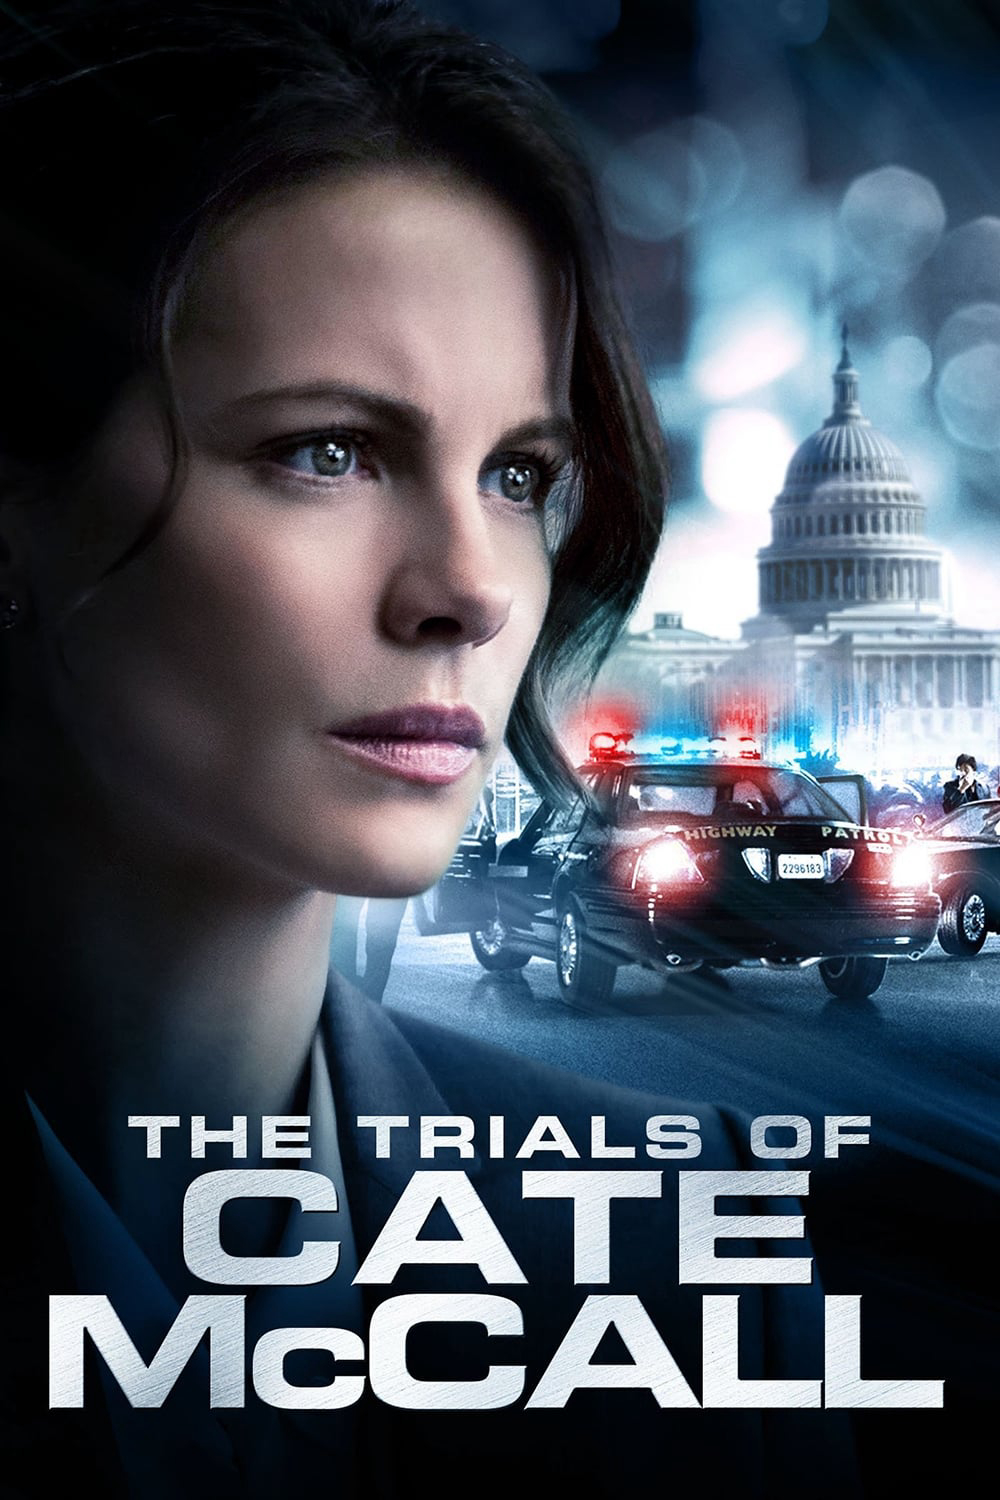 Poster Phim Vụ Án Gian Xảo (The Trials of Cate McCall)